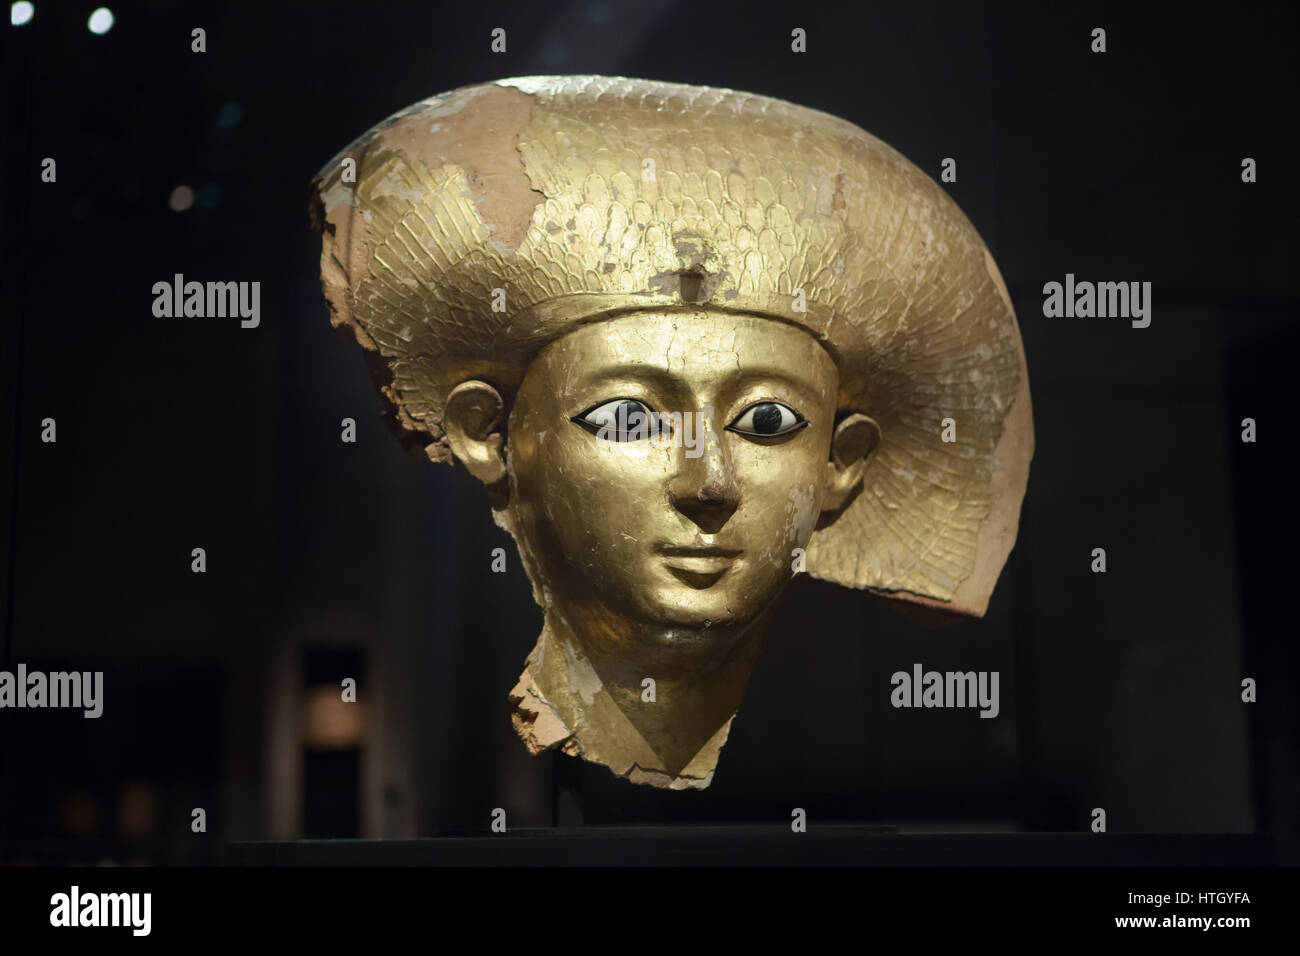 images Alamy - photography egyptian stock queen Ancient and hi-res